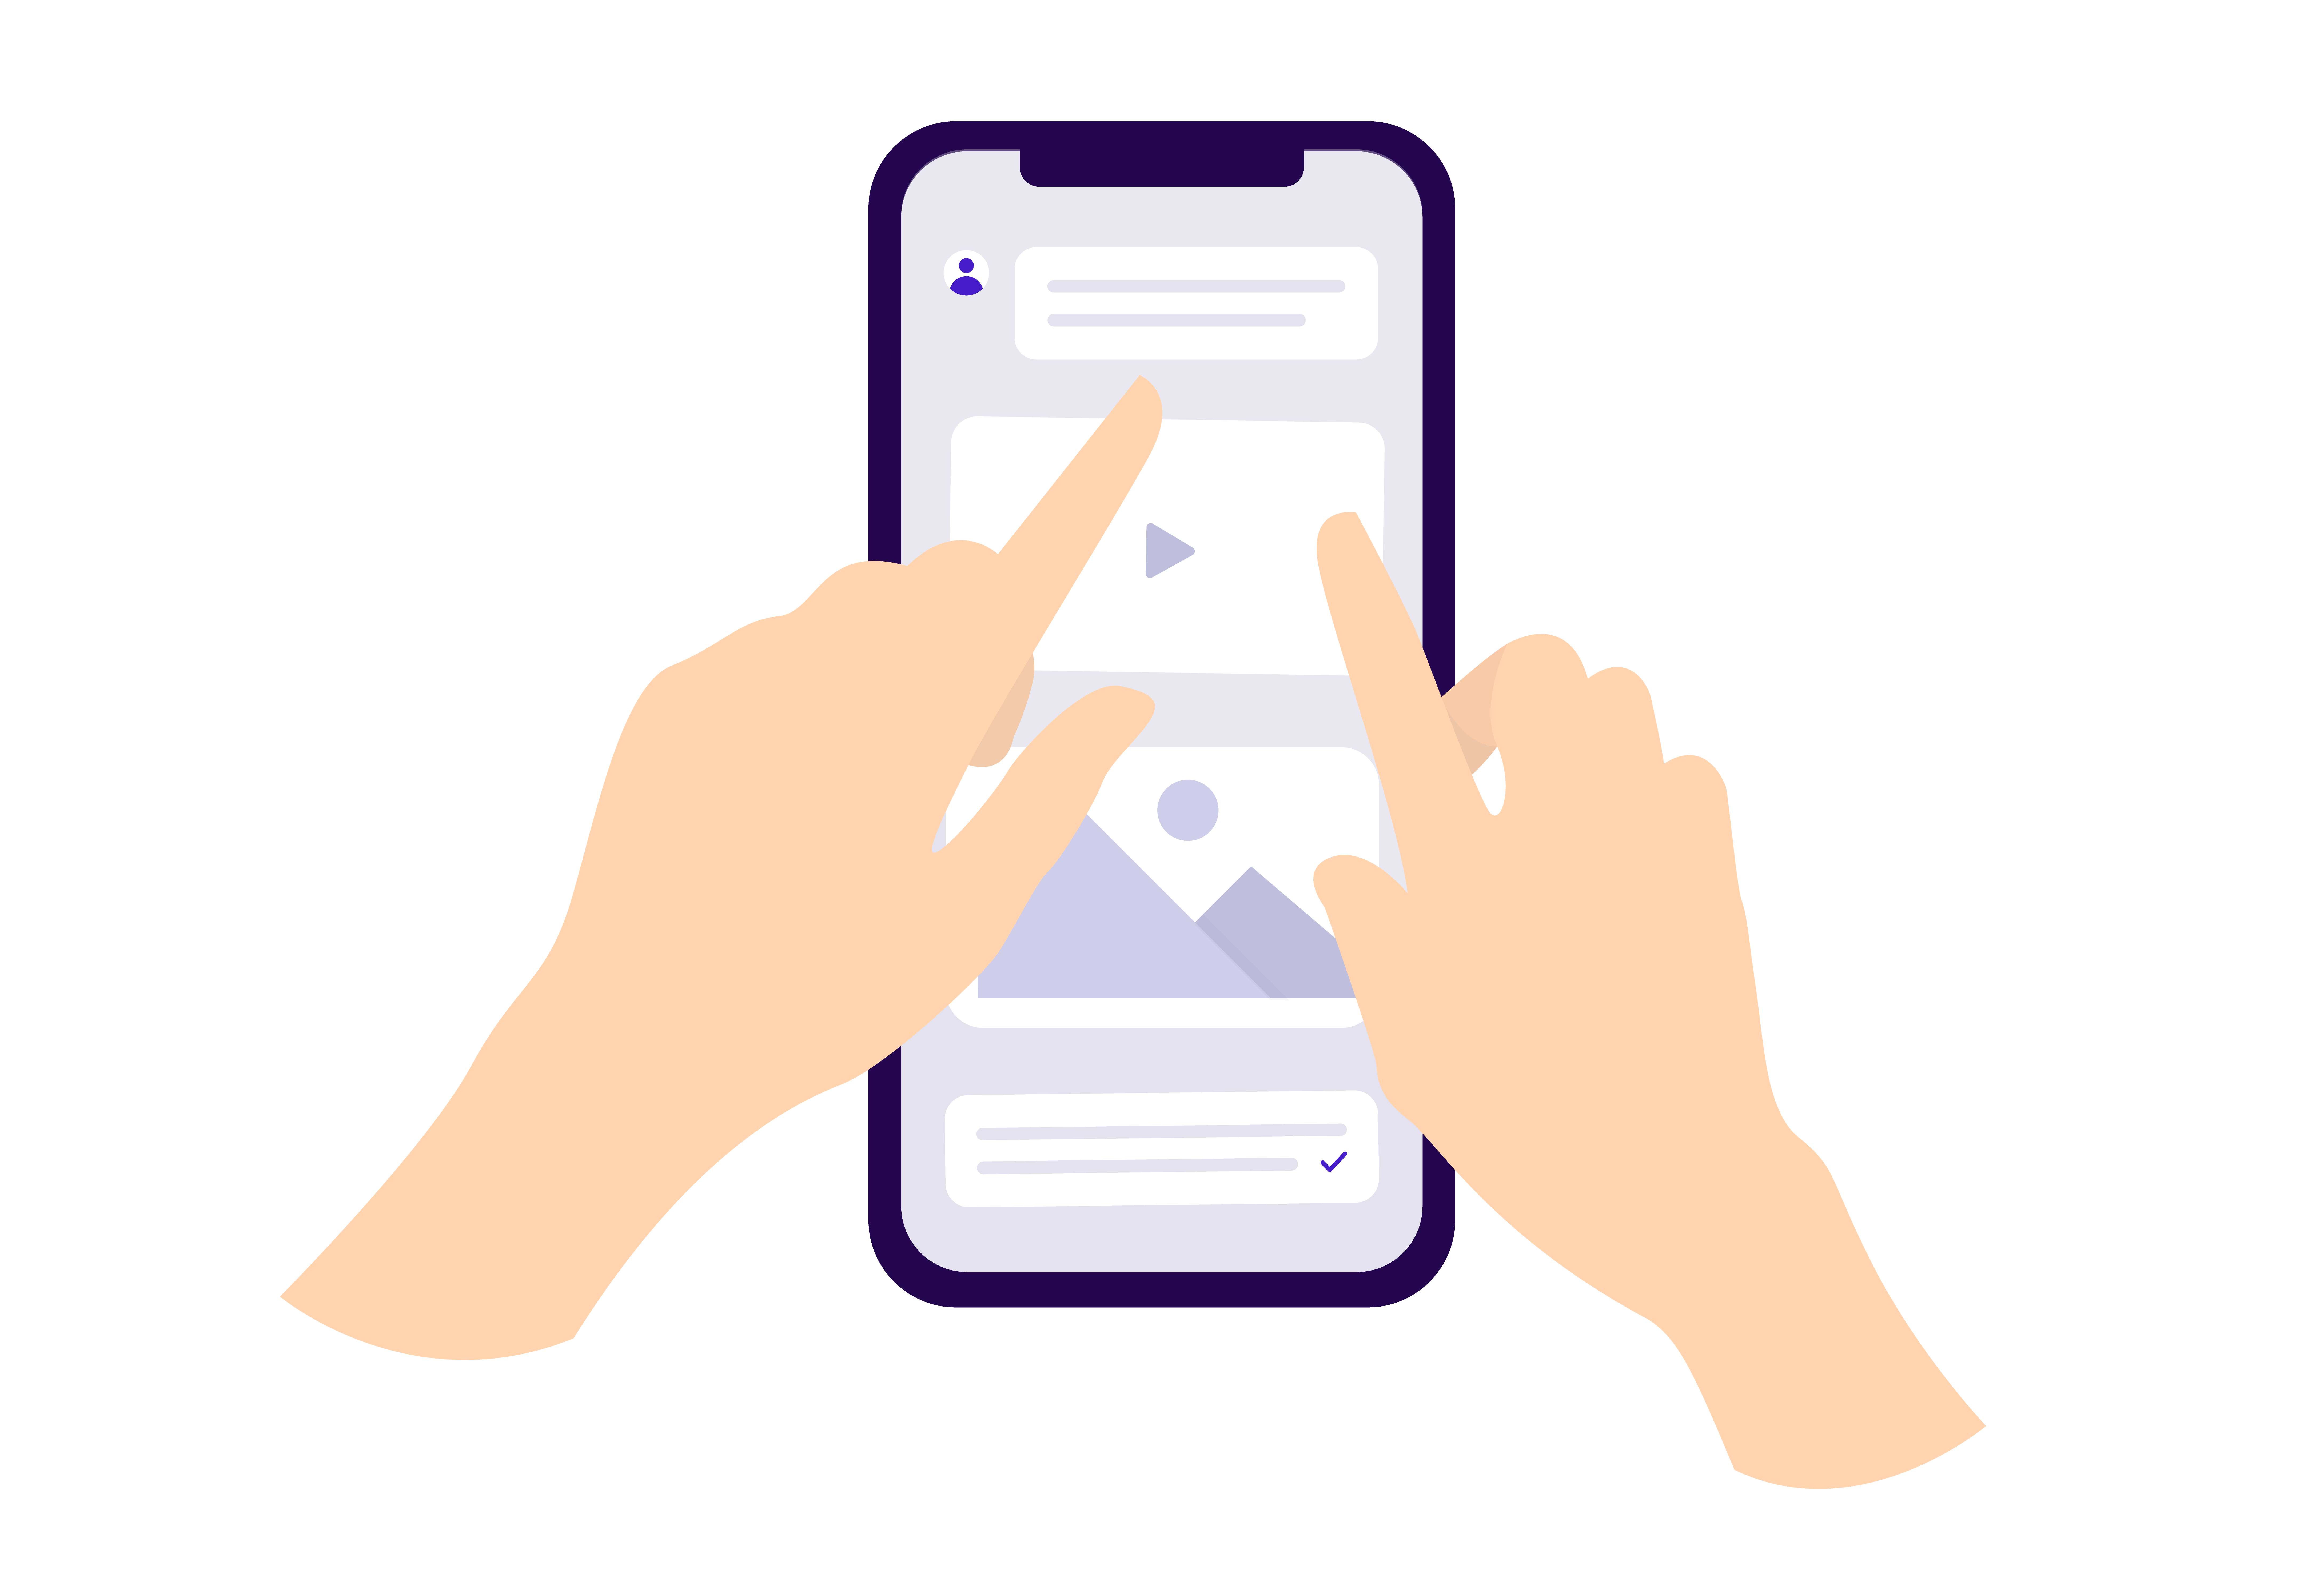 App Messaging. Illustration of hands typing a message on a smartphone